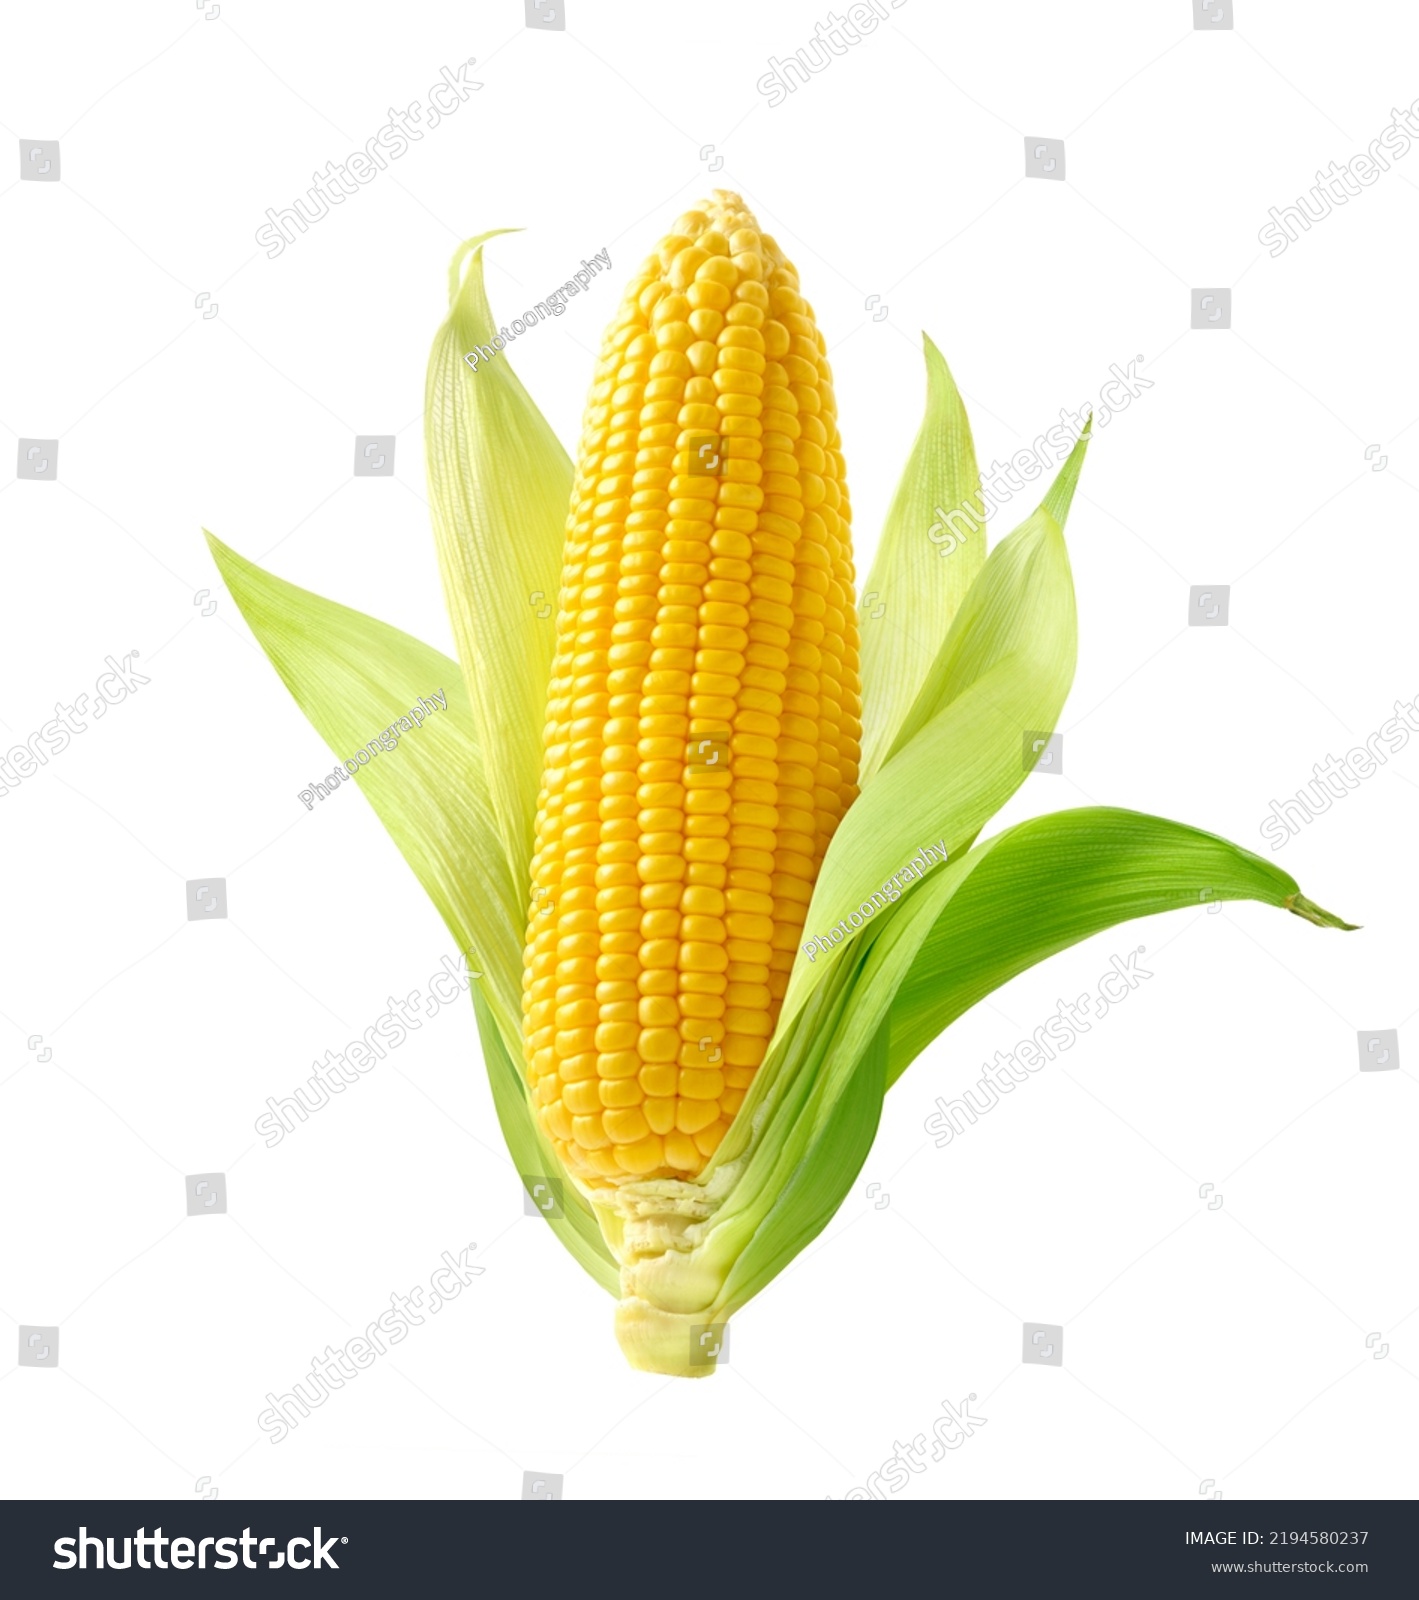 Fresh corn isolated on white background. Clipping path. #2194580237